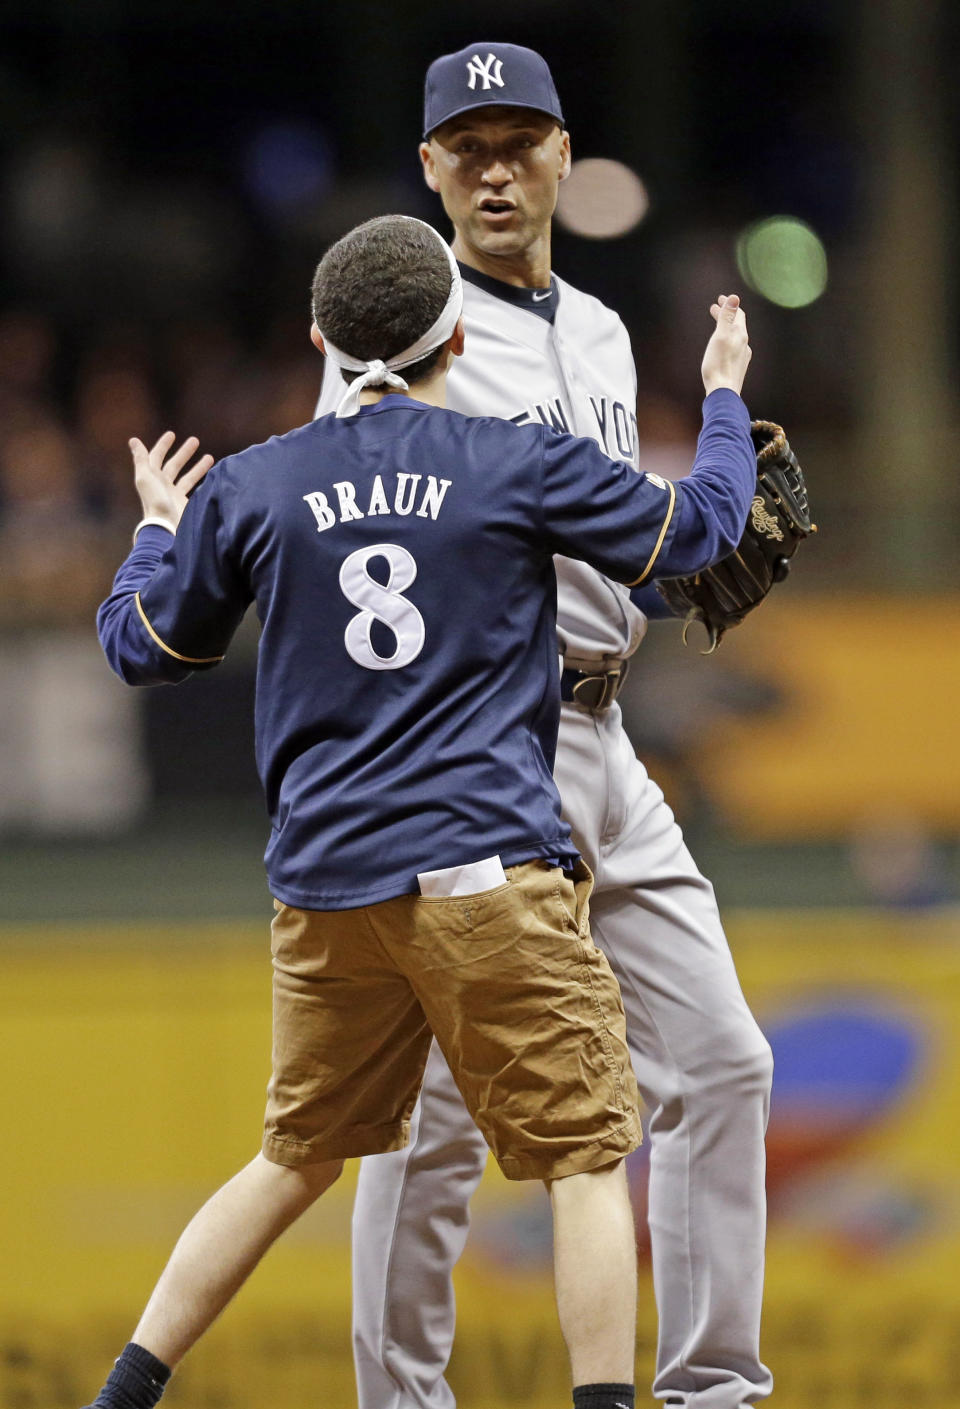 A fan runs out on the field to New York Yankees' Derek Jeter in the sixth inning of a baseball game against the Milwaukee Brewers, Friday, May 9, 2014, in Milwaukee. (AP Photo/Jeffrey Phelps)